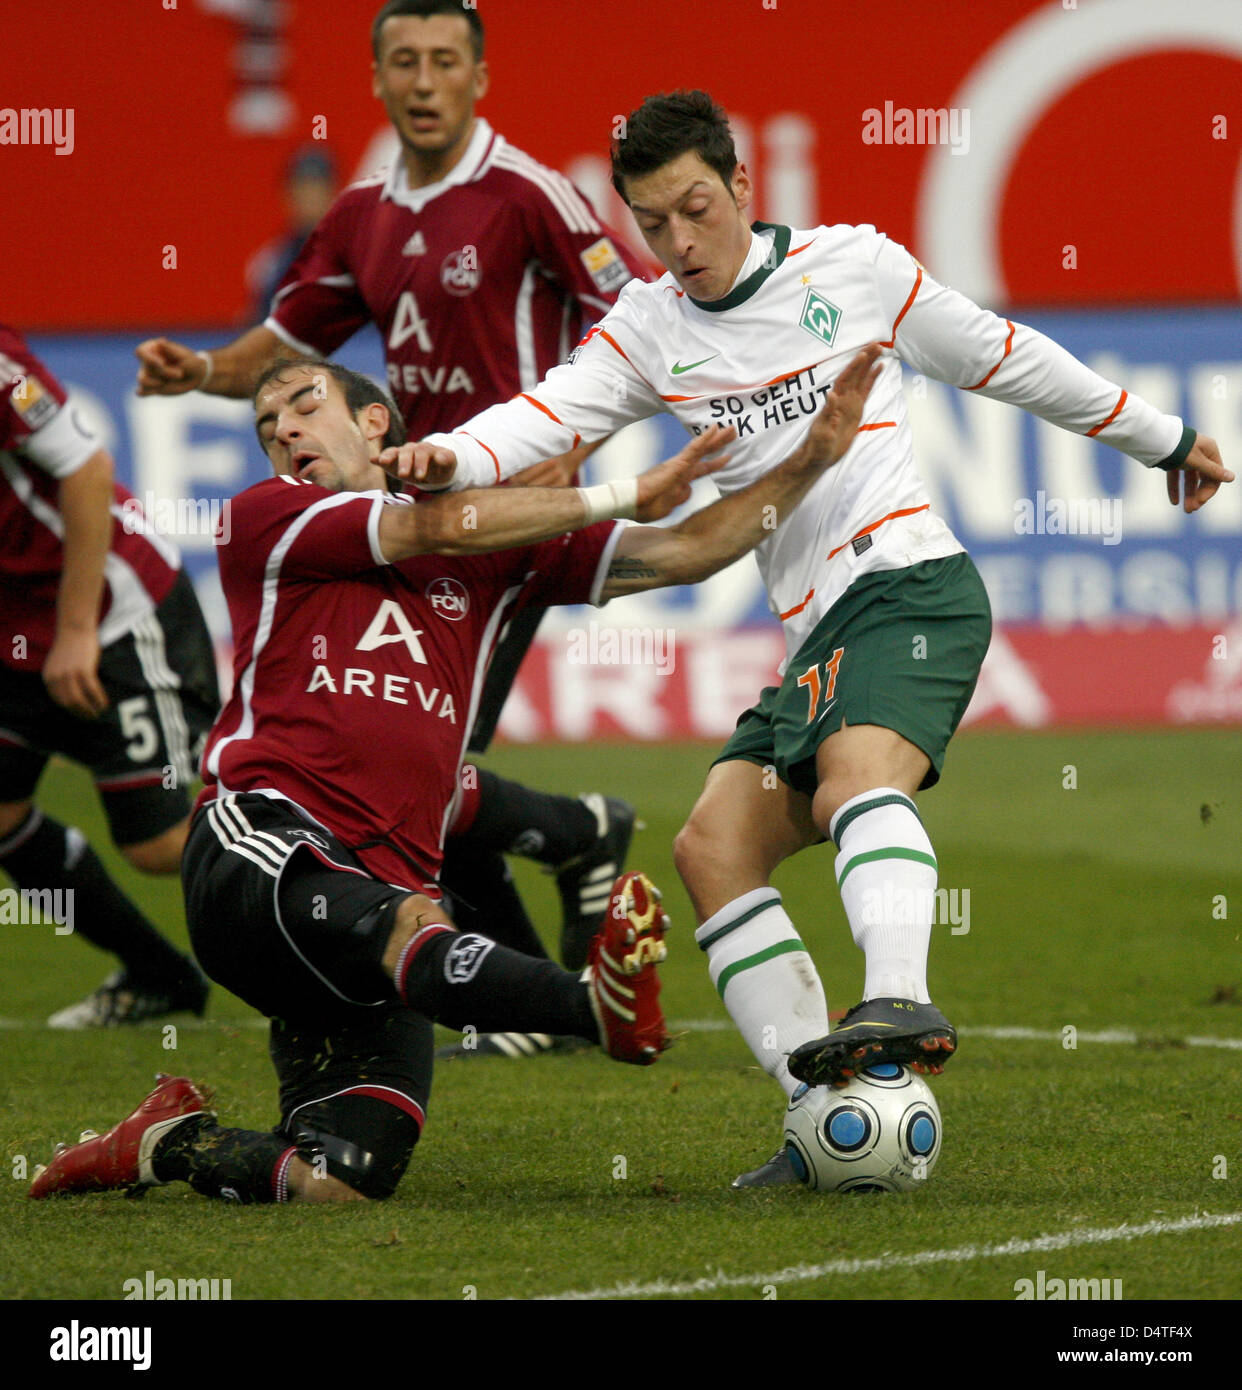 Nuremberg?s Javier Horacio Pinola (L) and Bremen?s Mesut Ozil (R) vie for the ball during the German Bundesliga match Nuremberg vs Werder Bremen at easyCredit Stadion in Nuremberg, Germany, 31 October 2009. Photo: DANIEL KARMANN (ATTENTION: EMBARGO CONDITIONS! The DFL permits the further utilisation of the pictures in IPTV, mobile services and other new technologies no earlier than Stock Photo